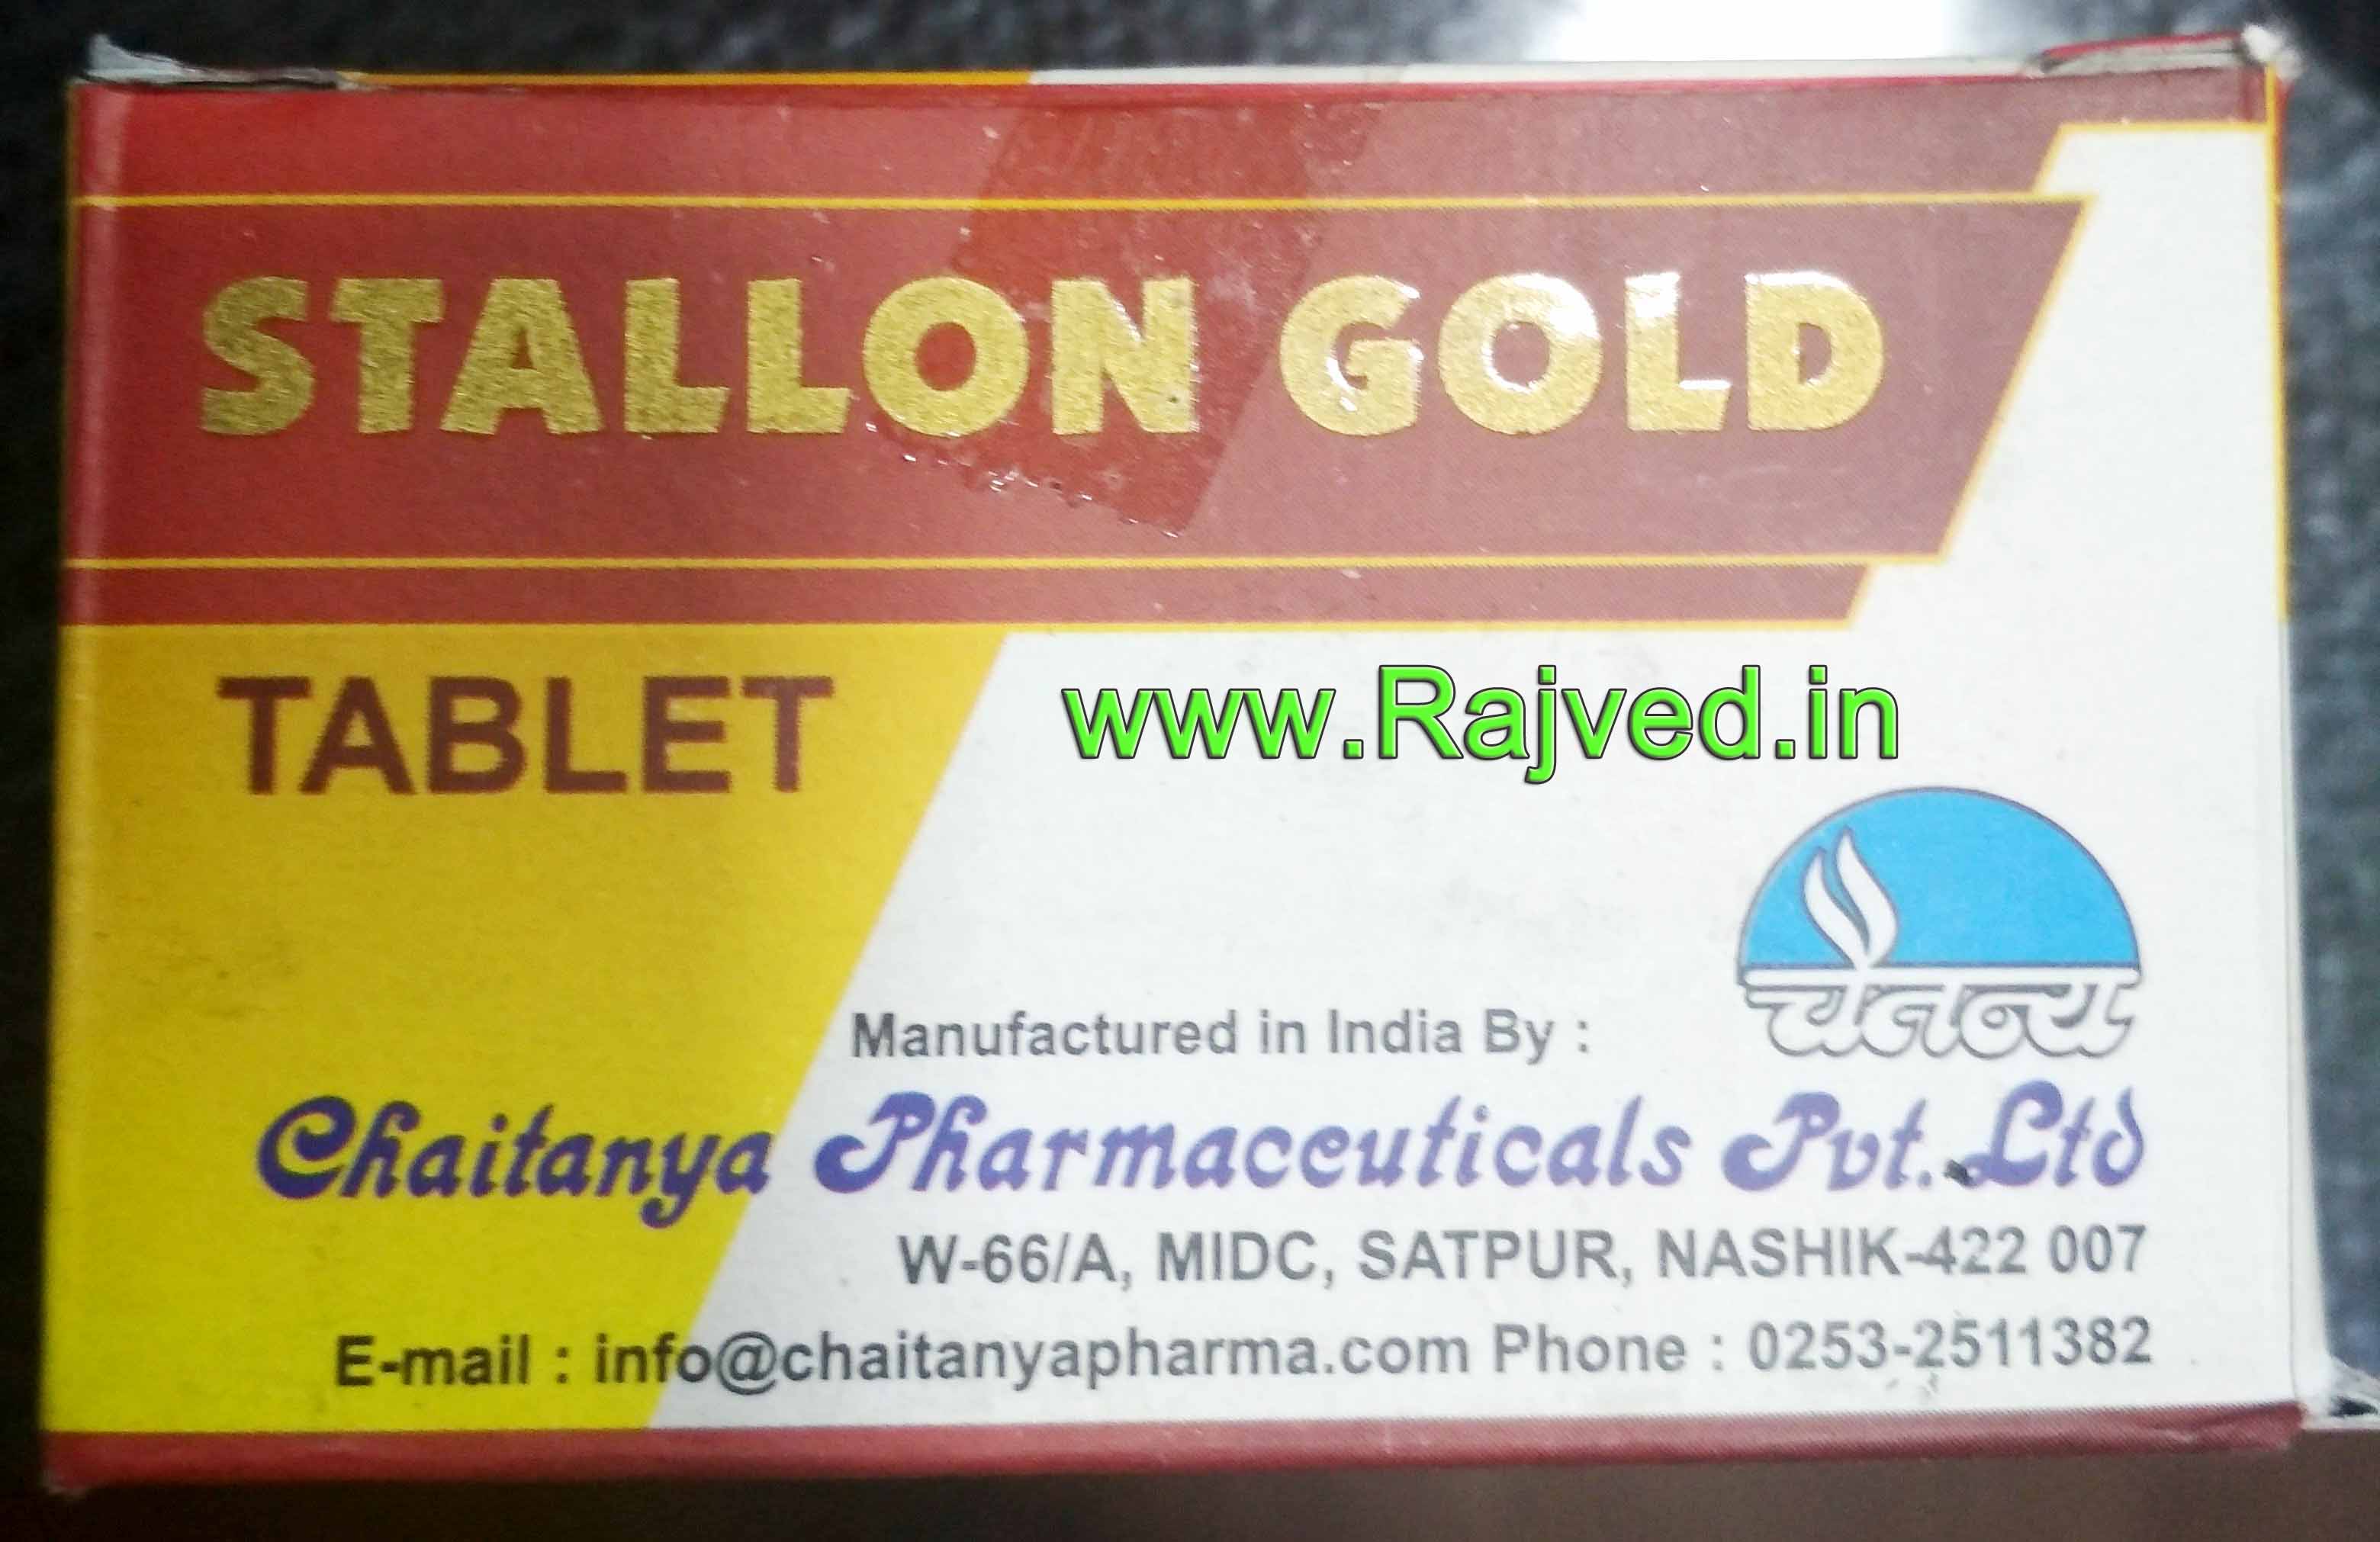 stallon gold tablets 2000tab upto 20% off free shipping chaitanya pharmaceuticals